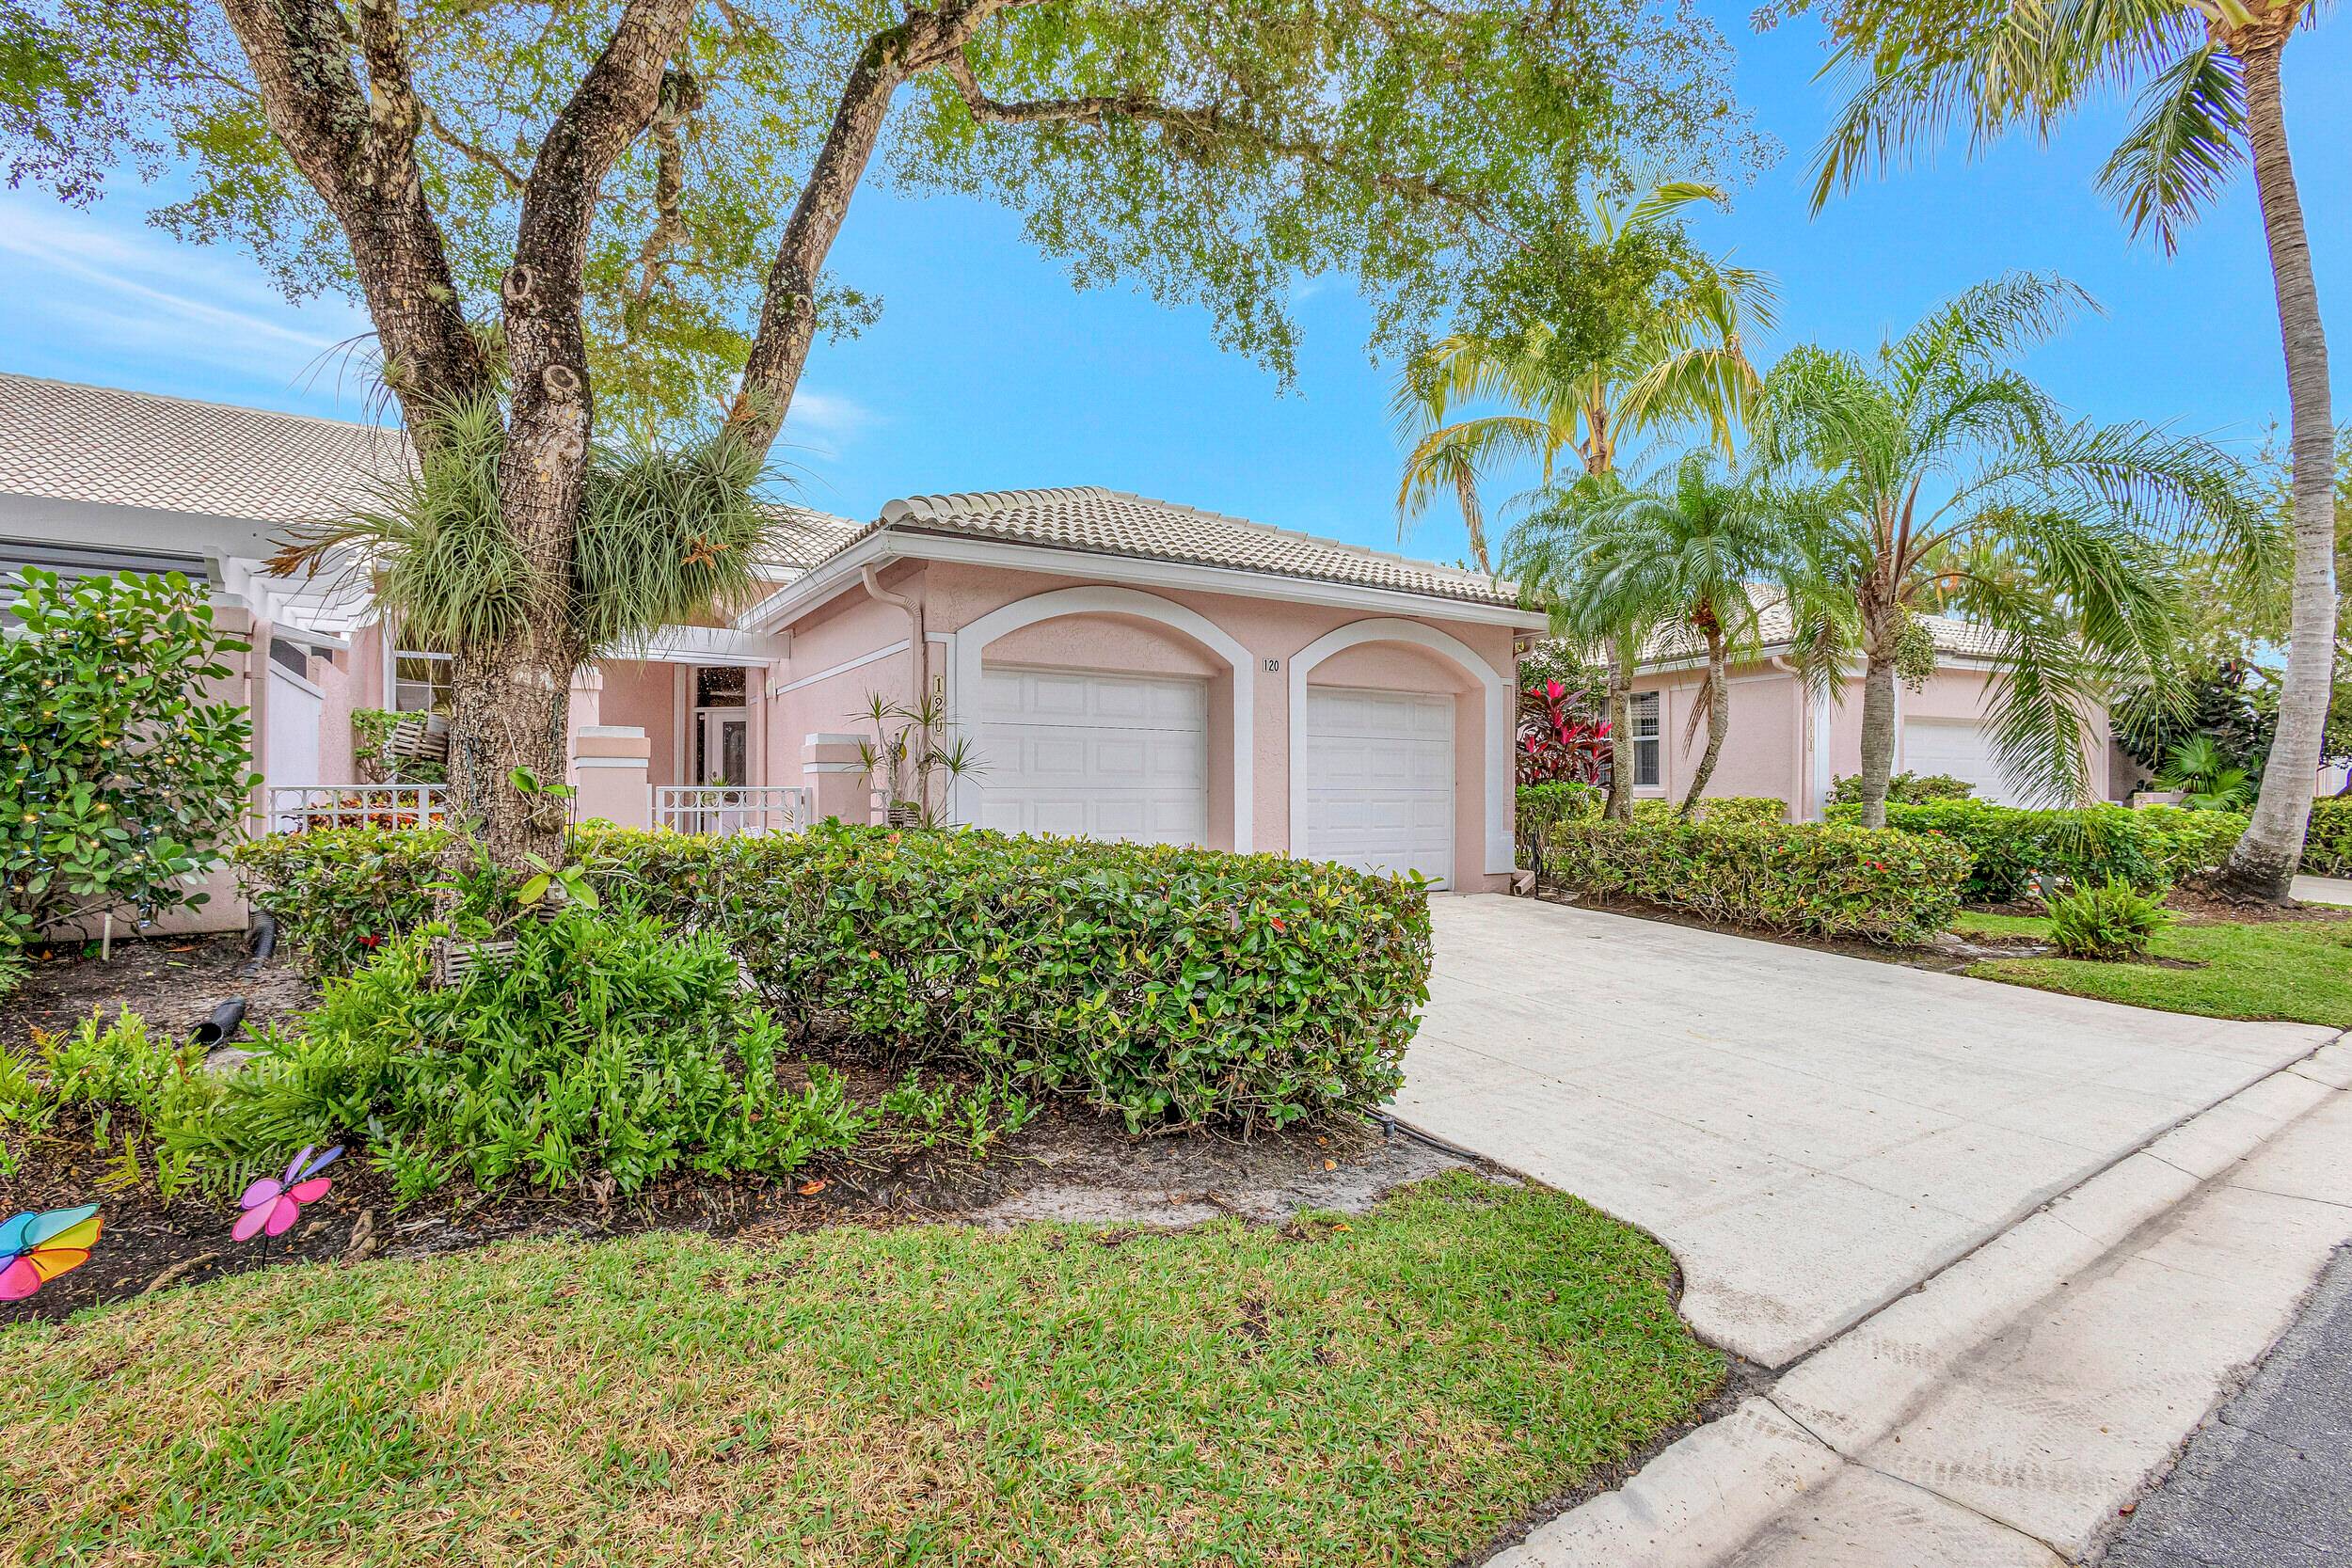 Live the dream in this immaculate, fully furnished townhouse nestled on the 9th hole of the legendary Palmer golf course at PGA National, home the Honda Classic on the PGA ...